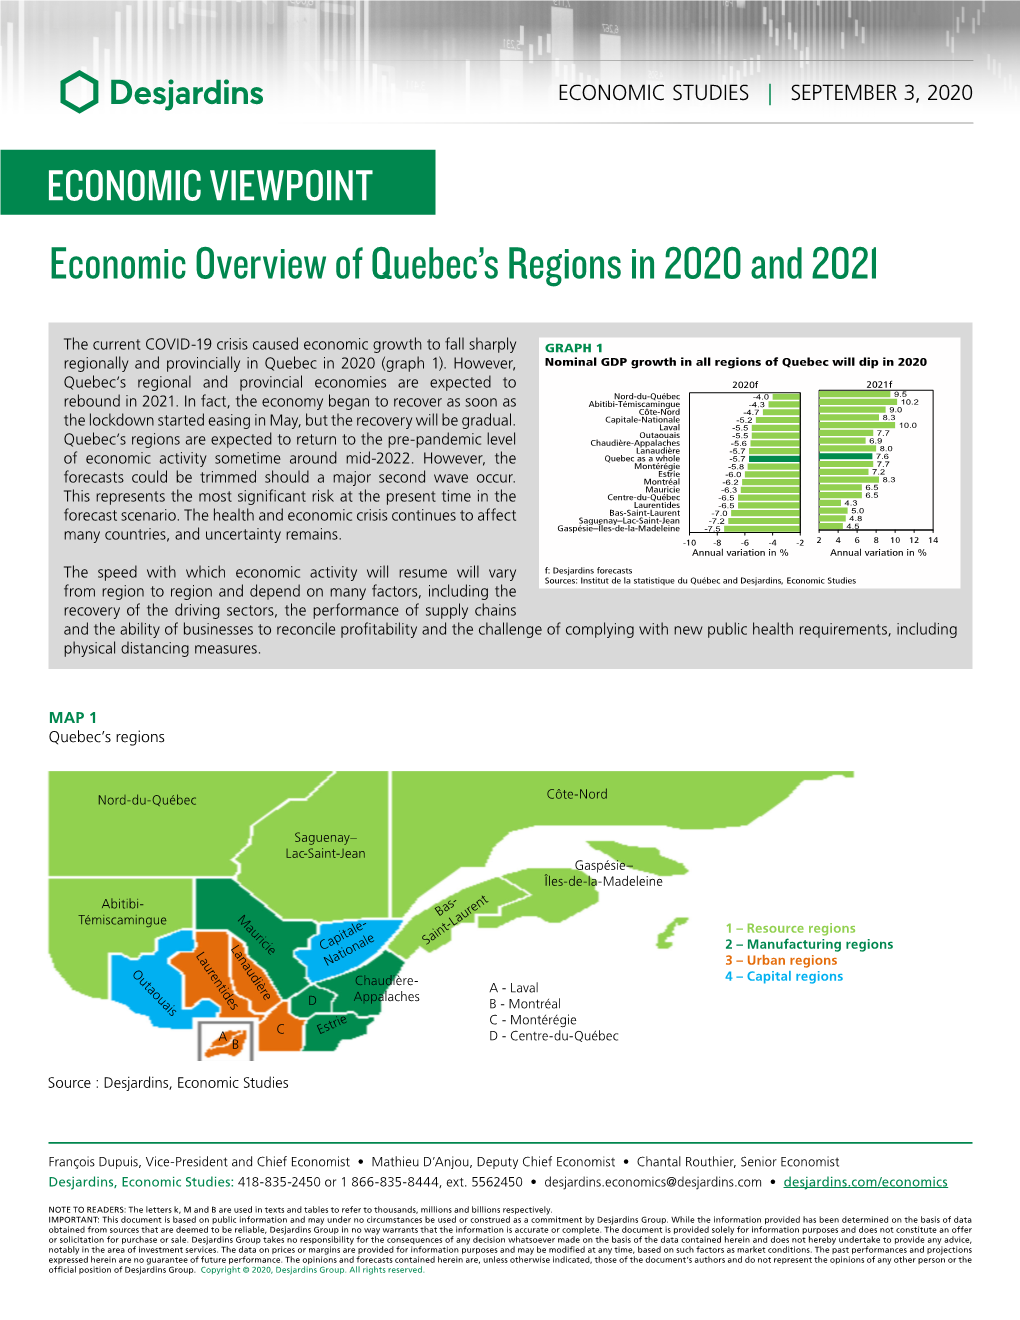 Economic Overview of Quebec's Regions in 2020 and 2021